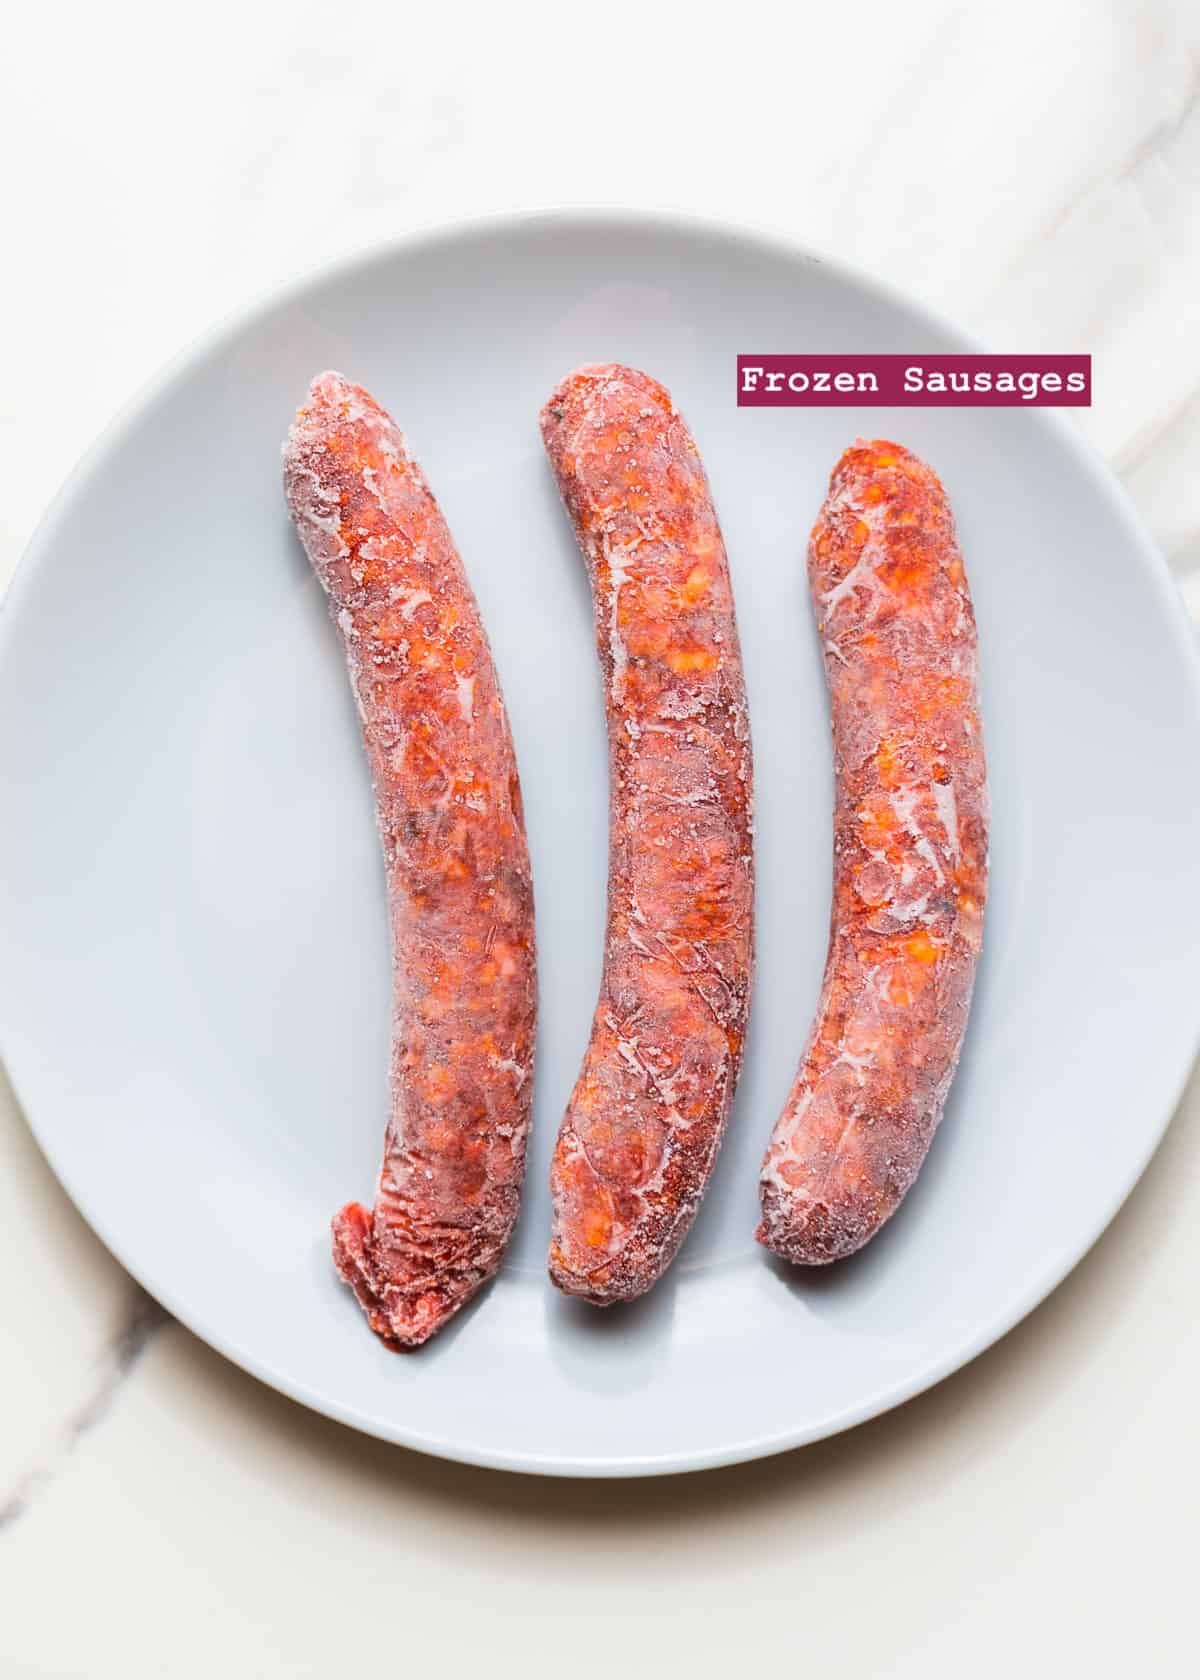 three frozen sausages in a grey dish on a white surface.